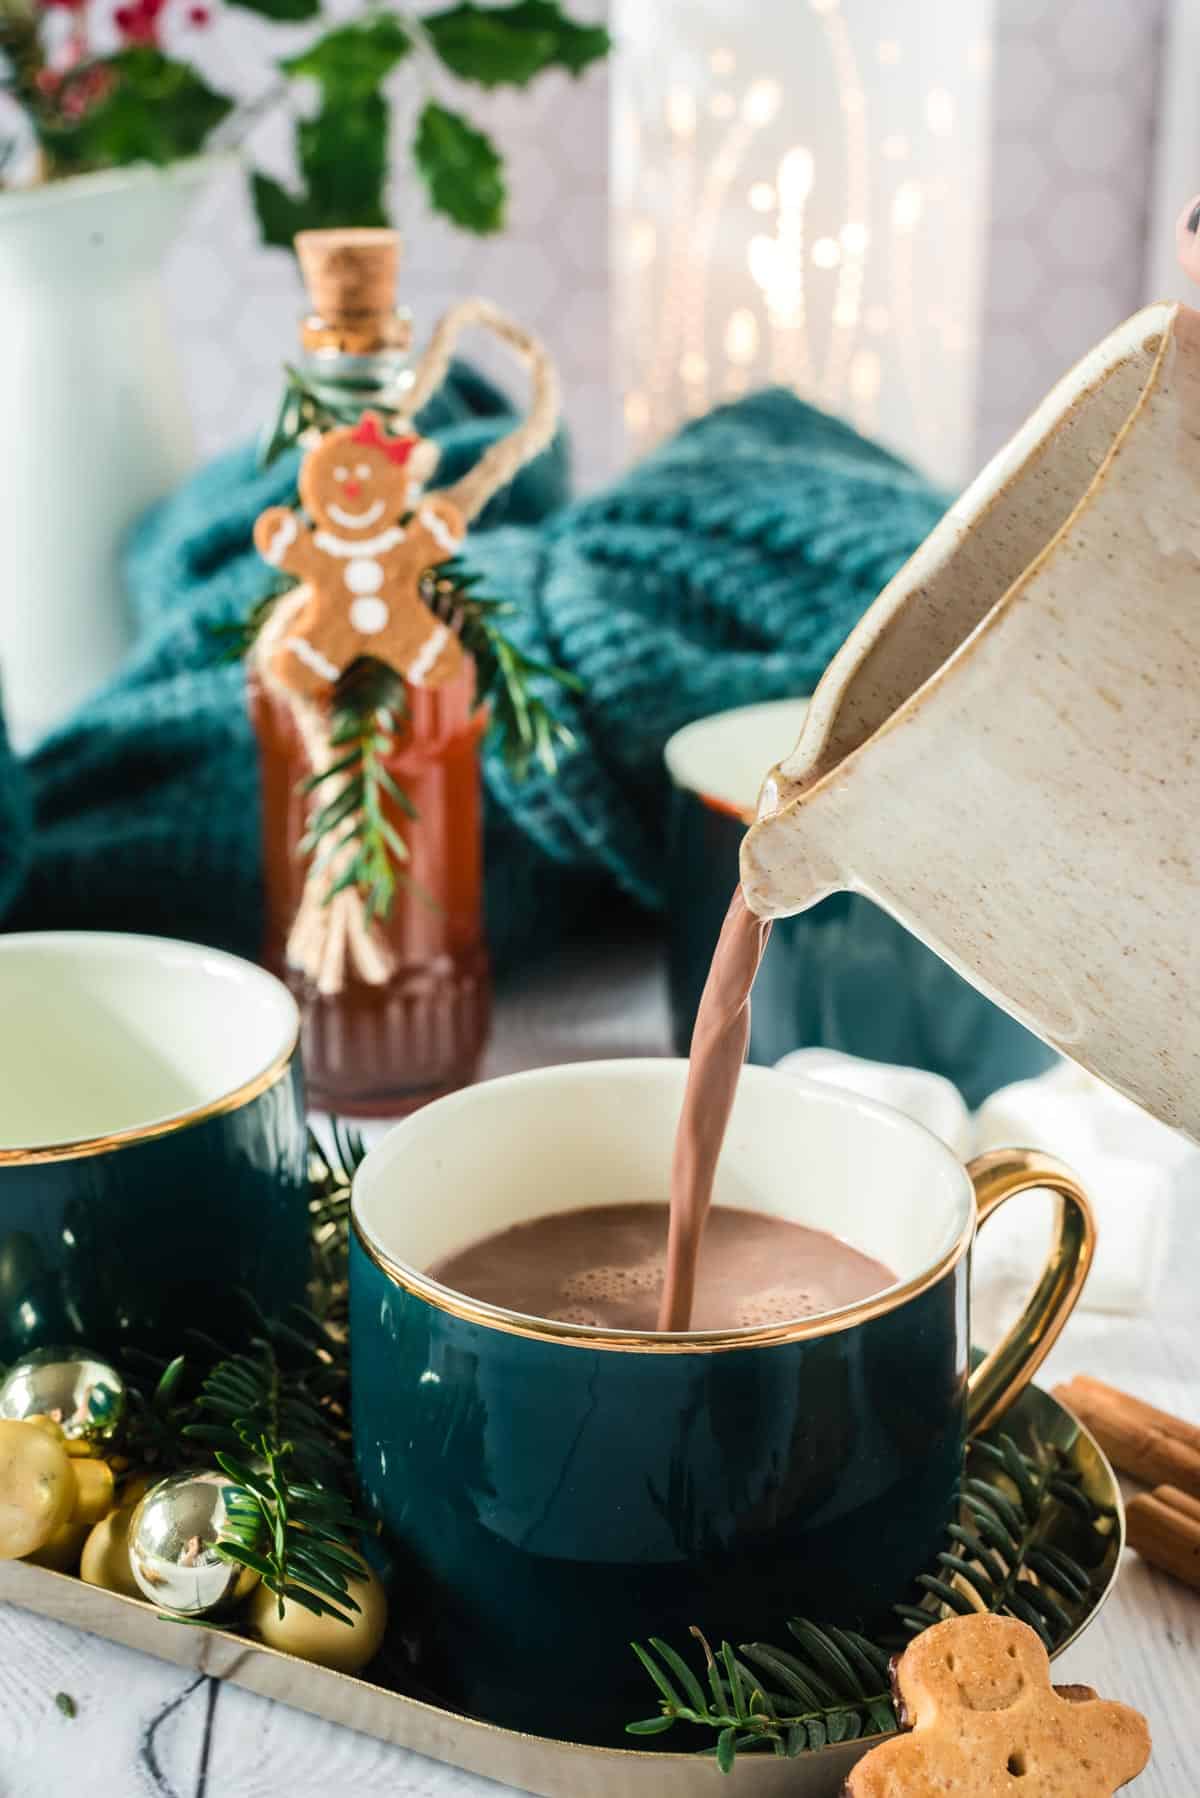 Cocoa being poured into a green mug.